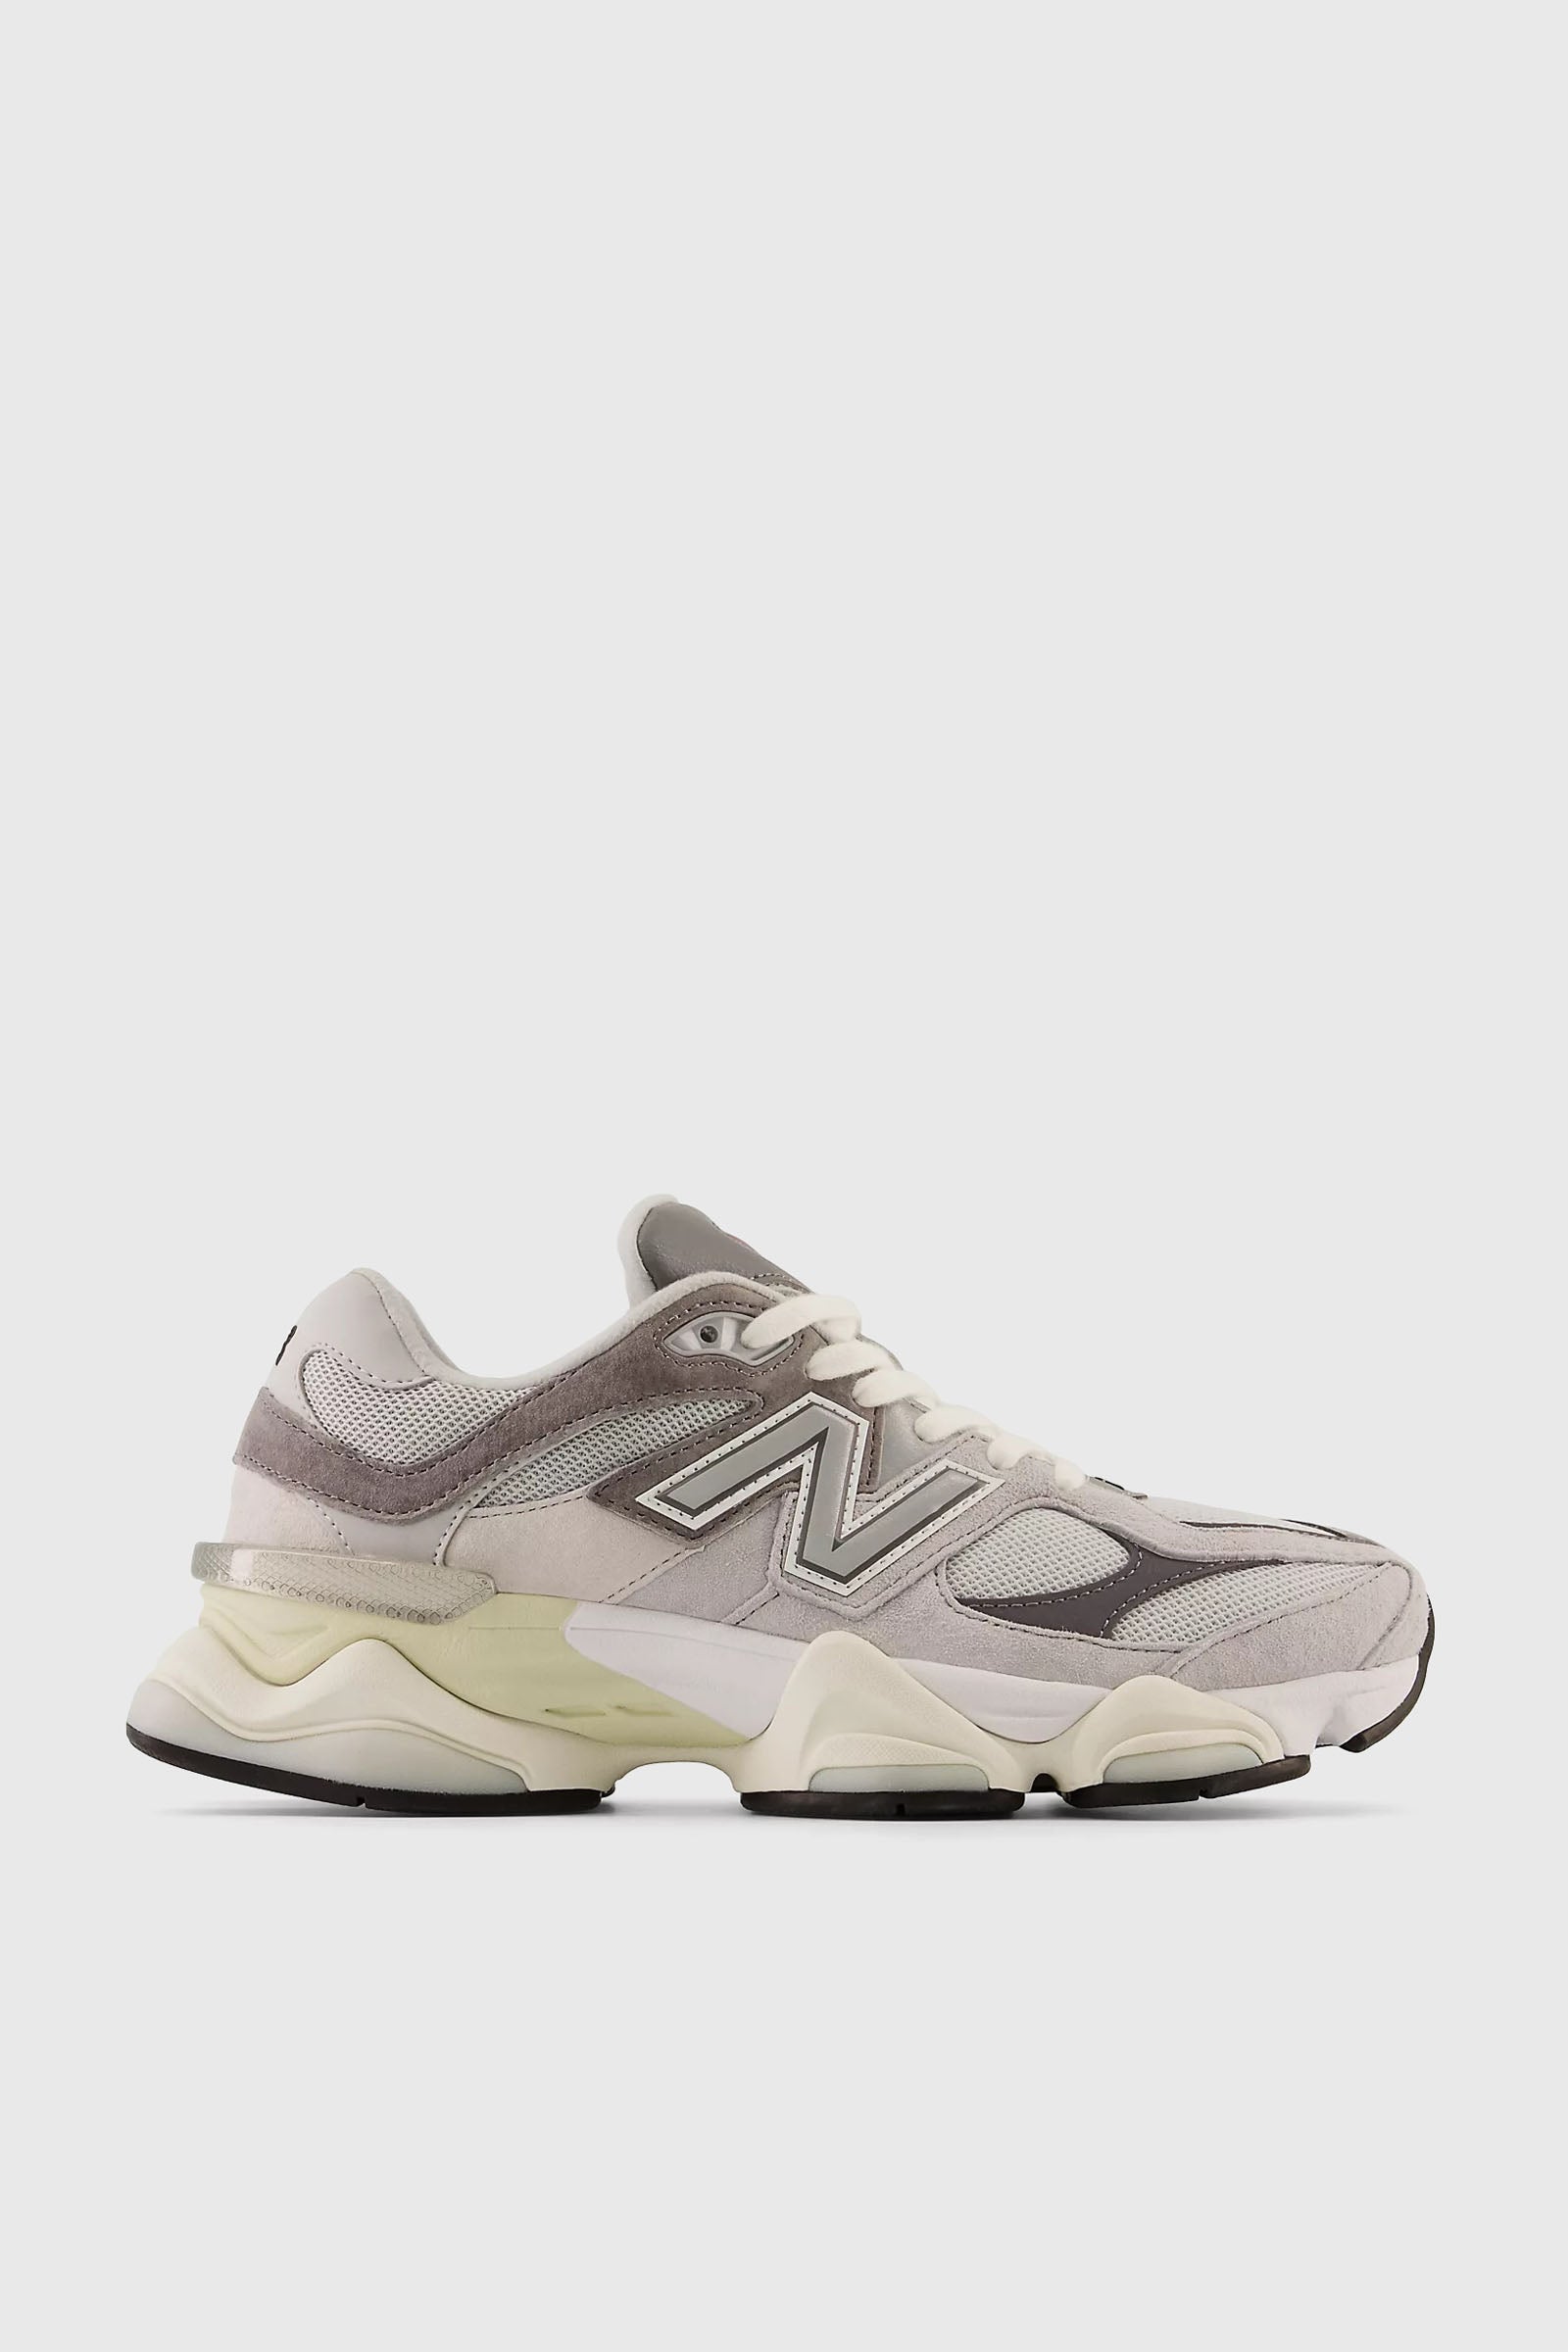 H1 Title: New Balance 9060 Synthetic Grey Sneaker - 1